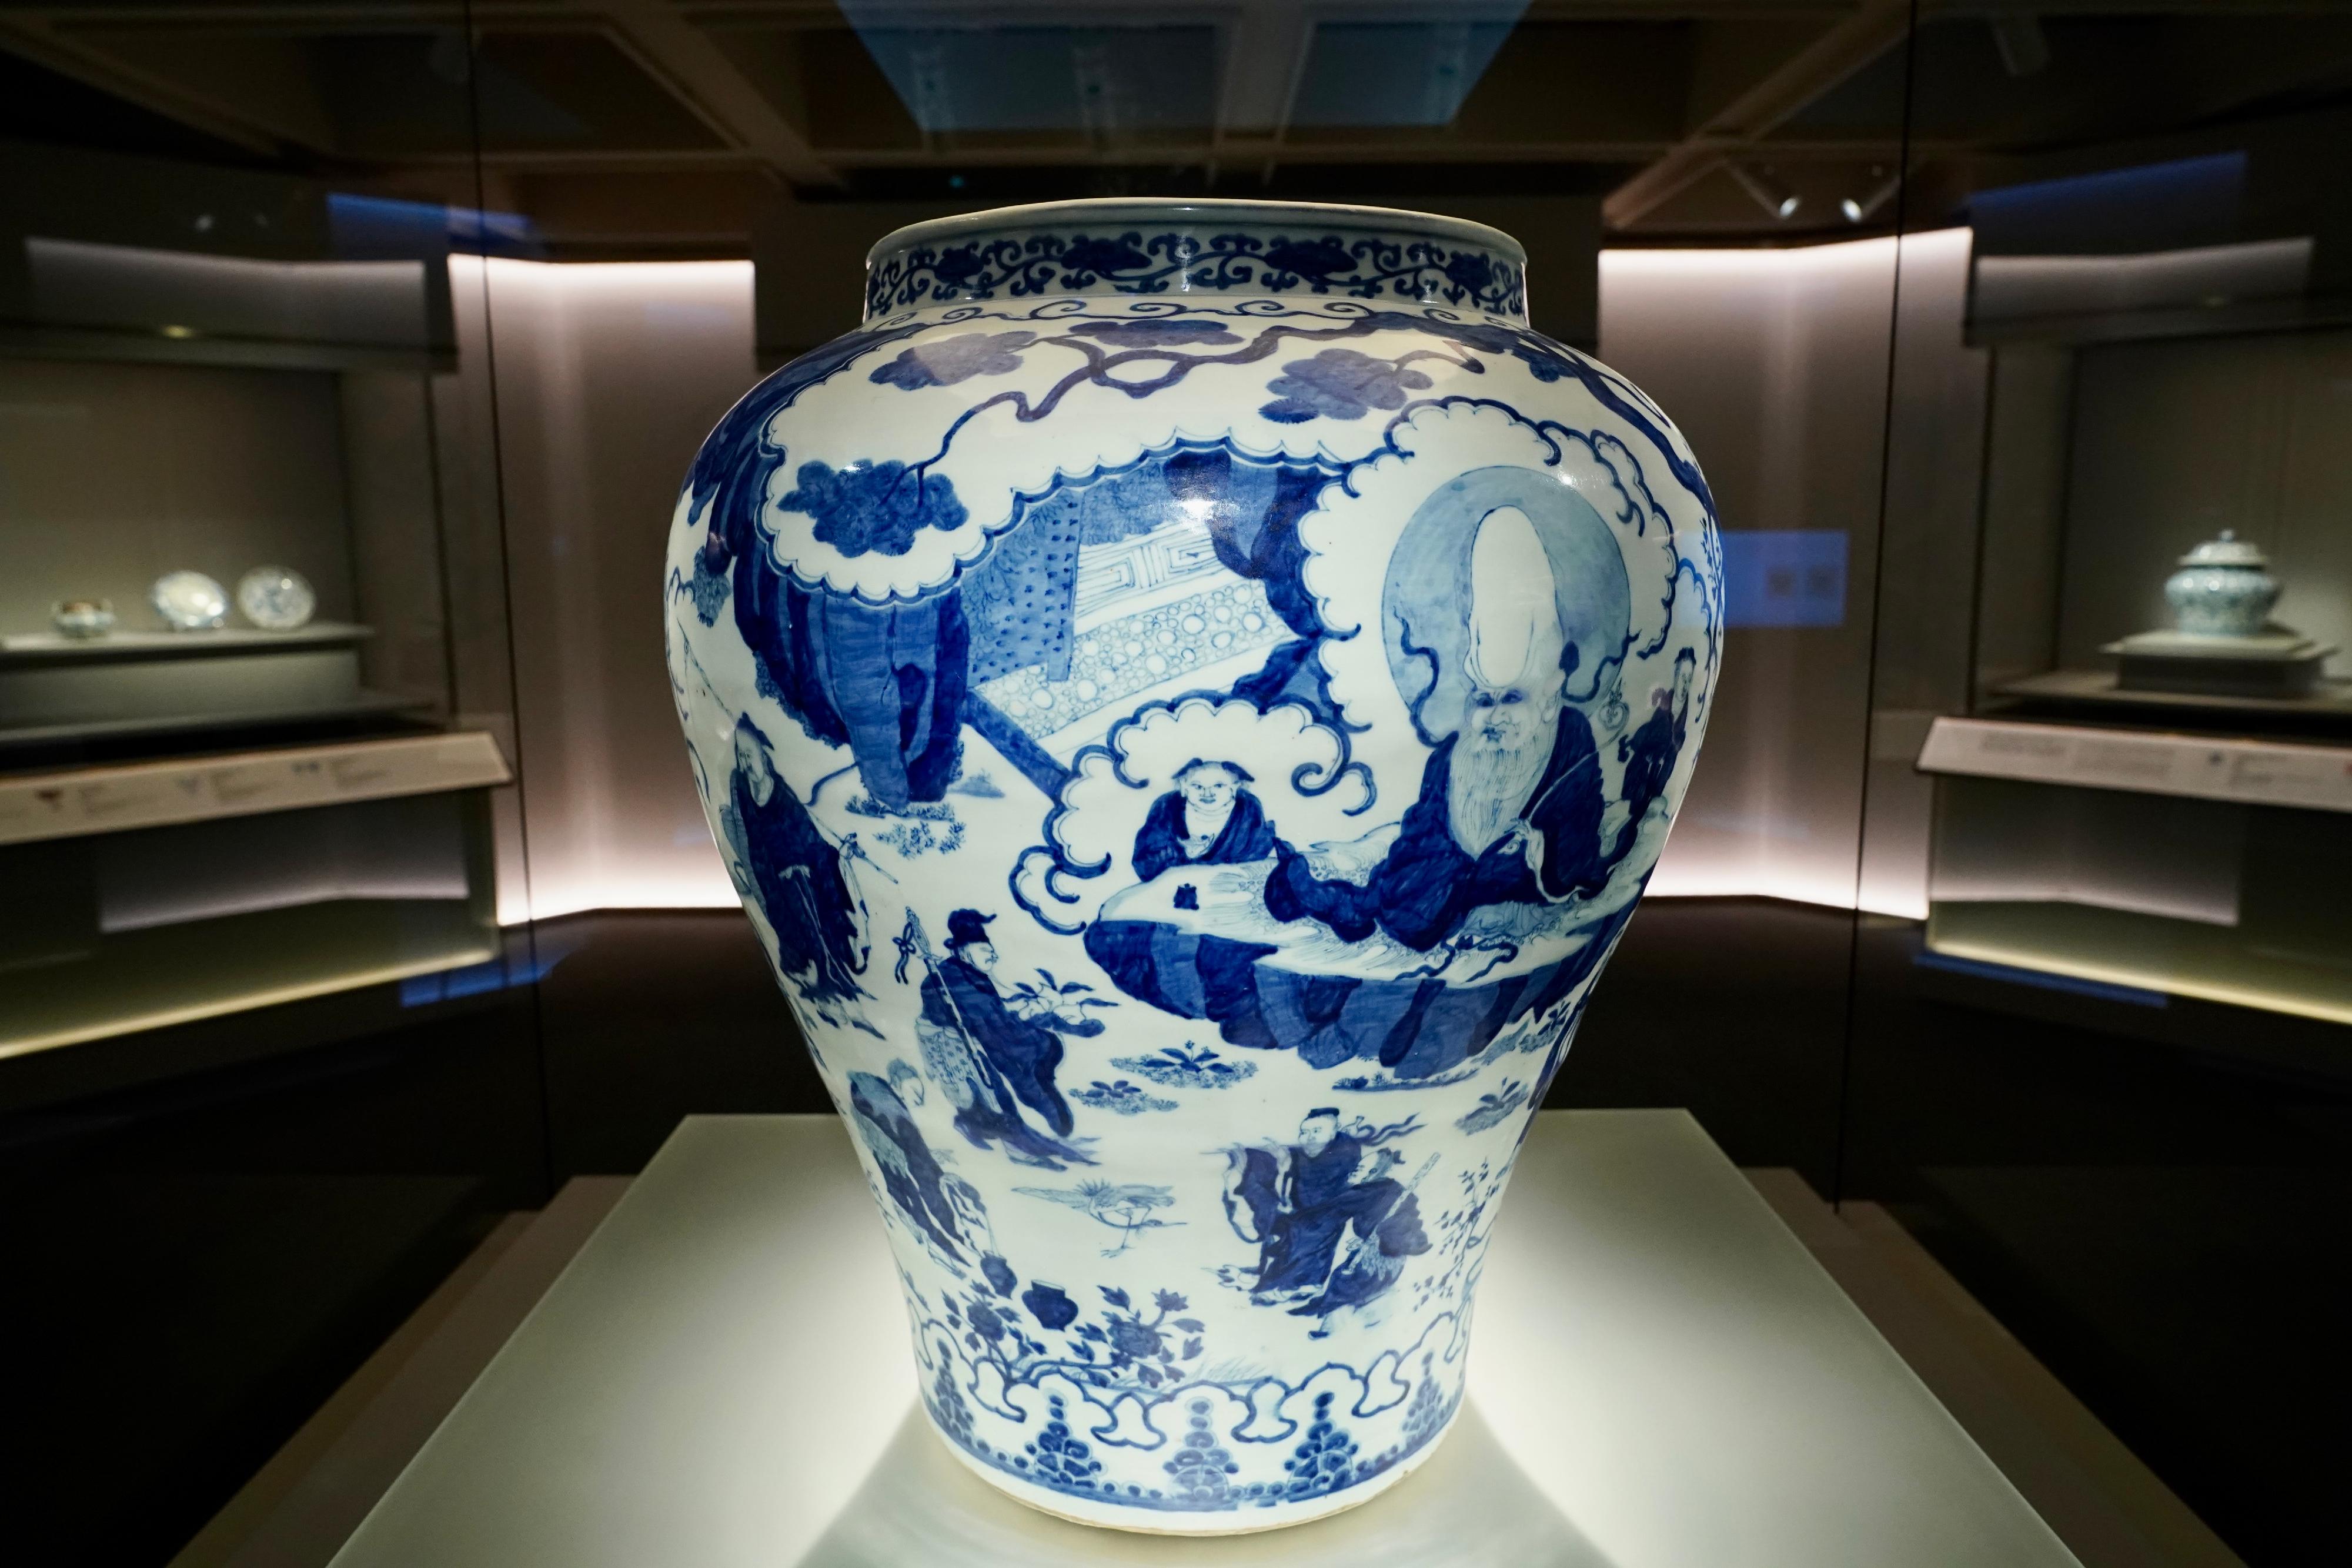 The Hong Kong Museum of Art has launched a new exhibition, "Eternal Enlightenment: the Virtual World of Jiajing Emperor", displaying 240 precious exhibits of the Jiajing period from the Huaihaitang collection of prestigious local collector Mr Anthony Cheung. Photo shows a large jar with a scene of immortals presenting birthday wishes in underglaze blue.